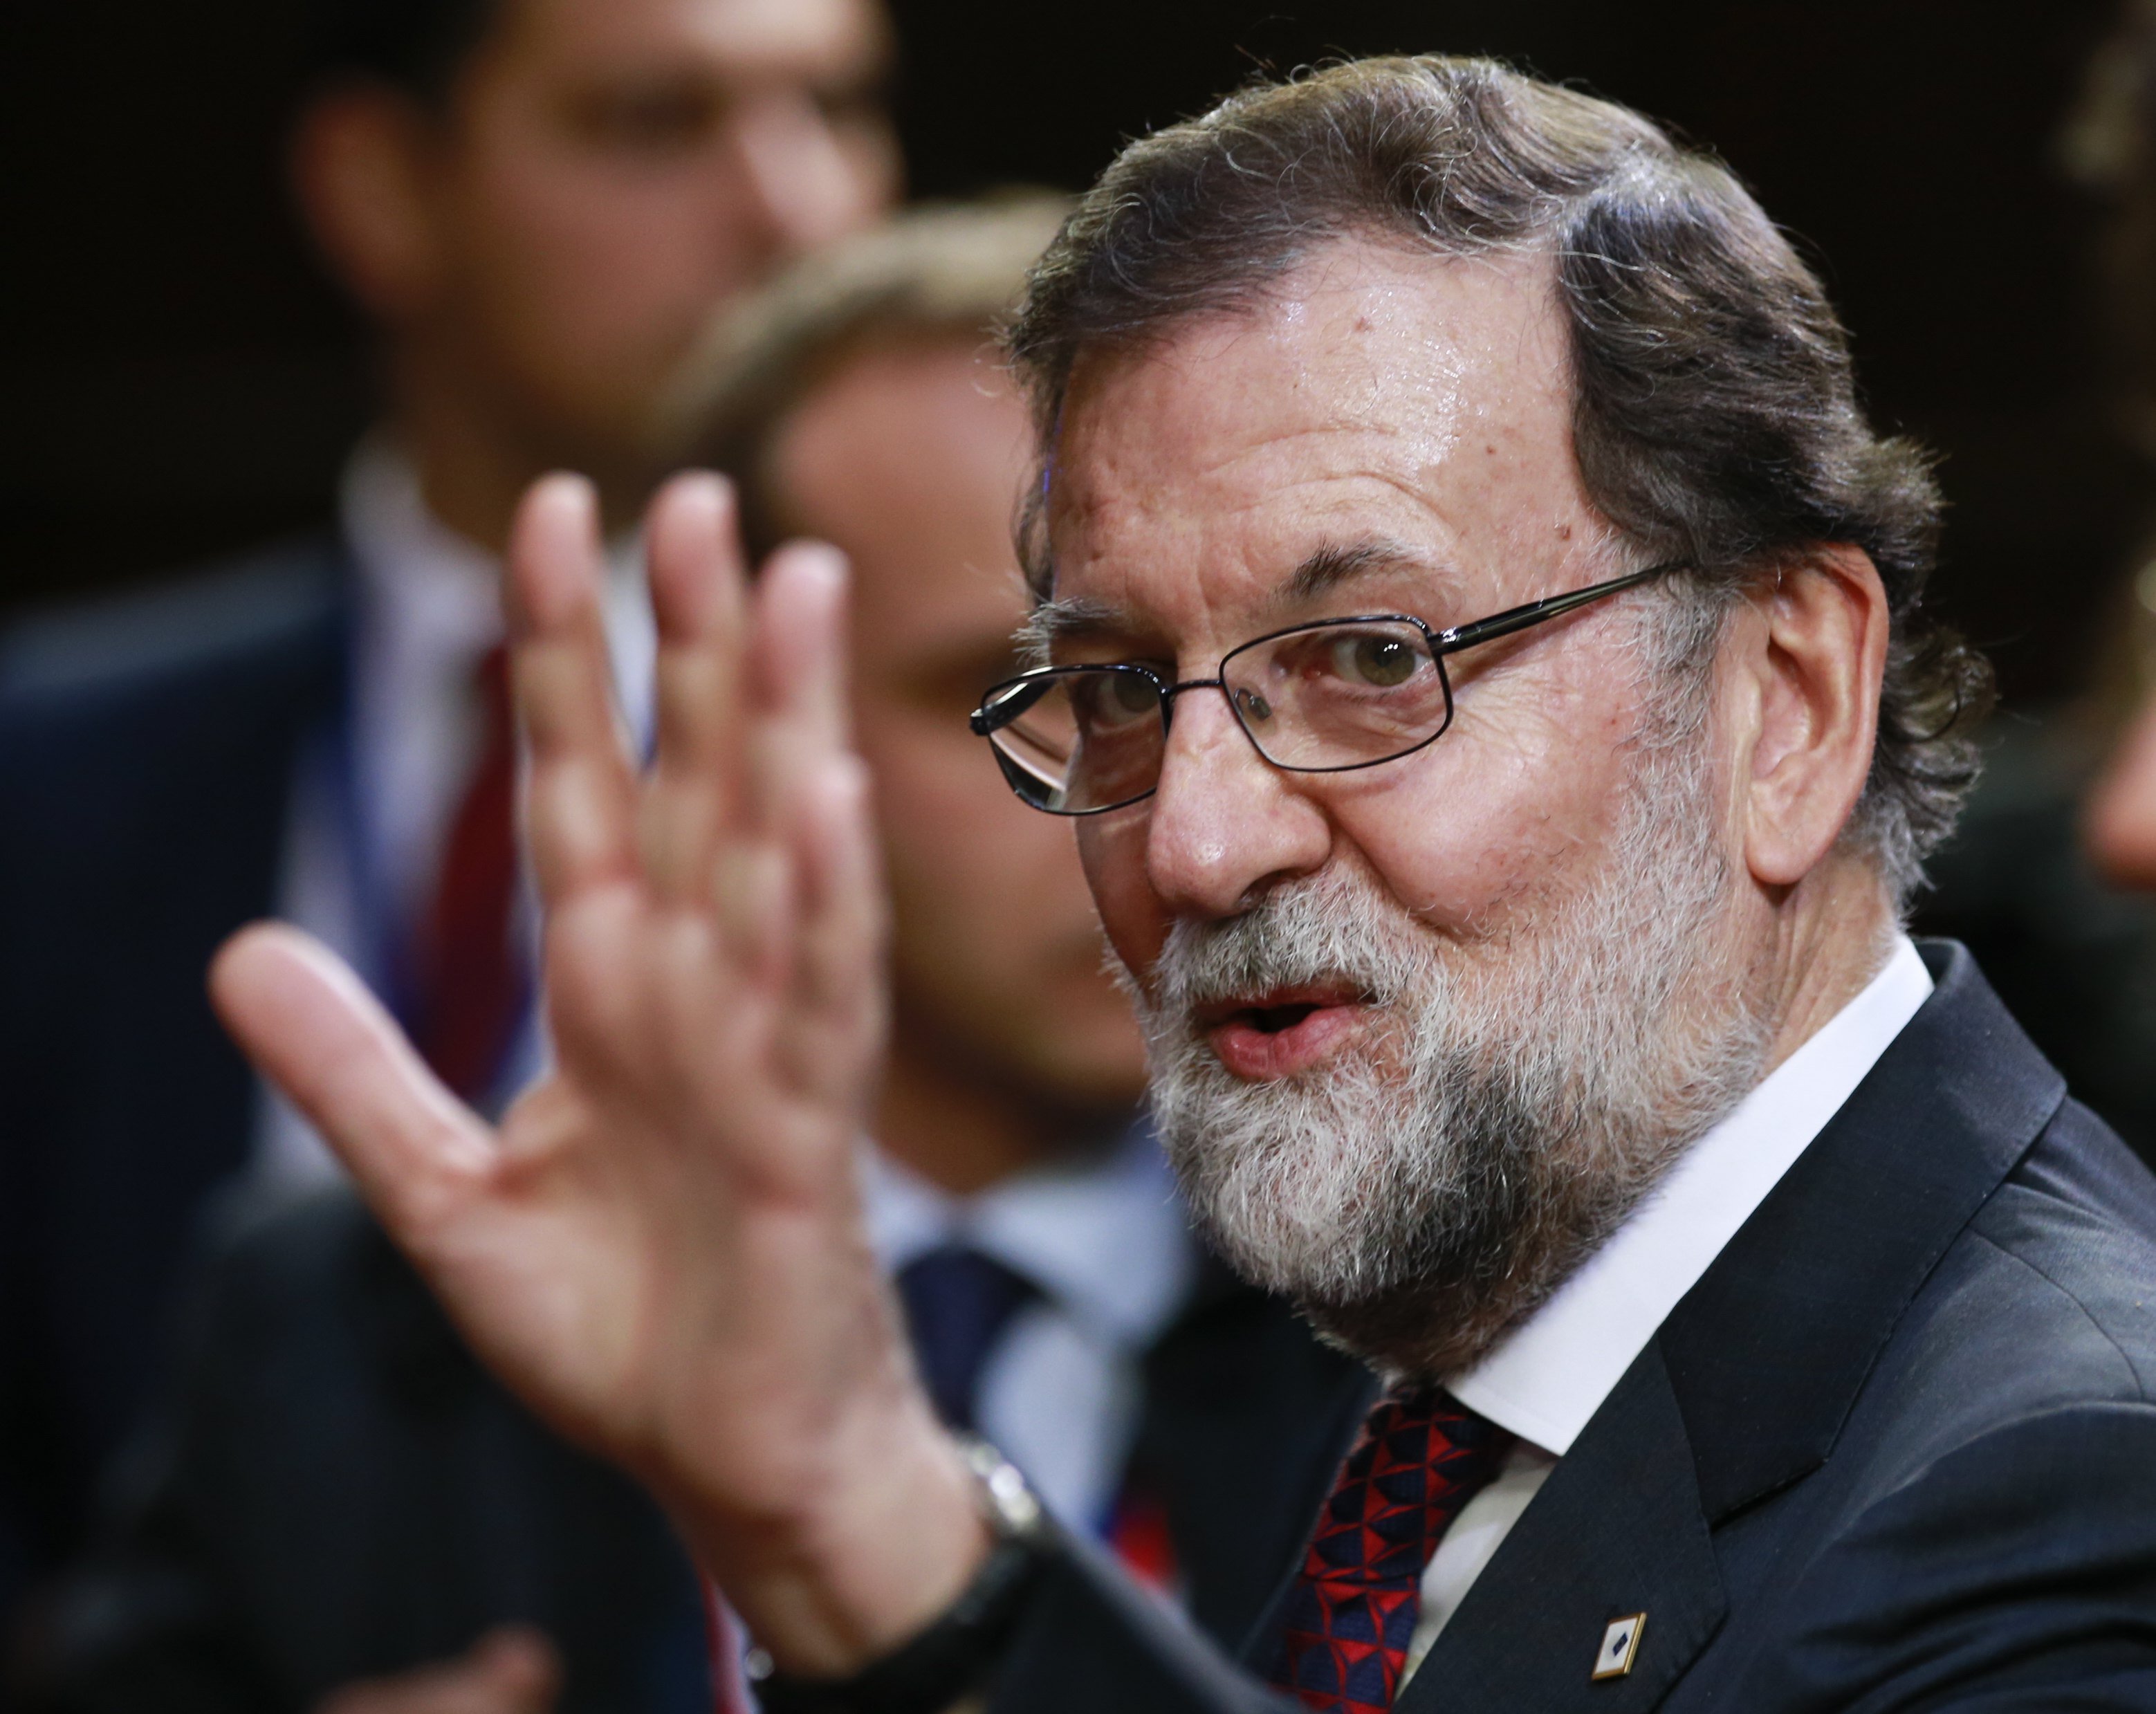 Confusion among Spanish parties over plans after suspending Catalan autonomy